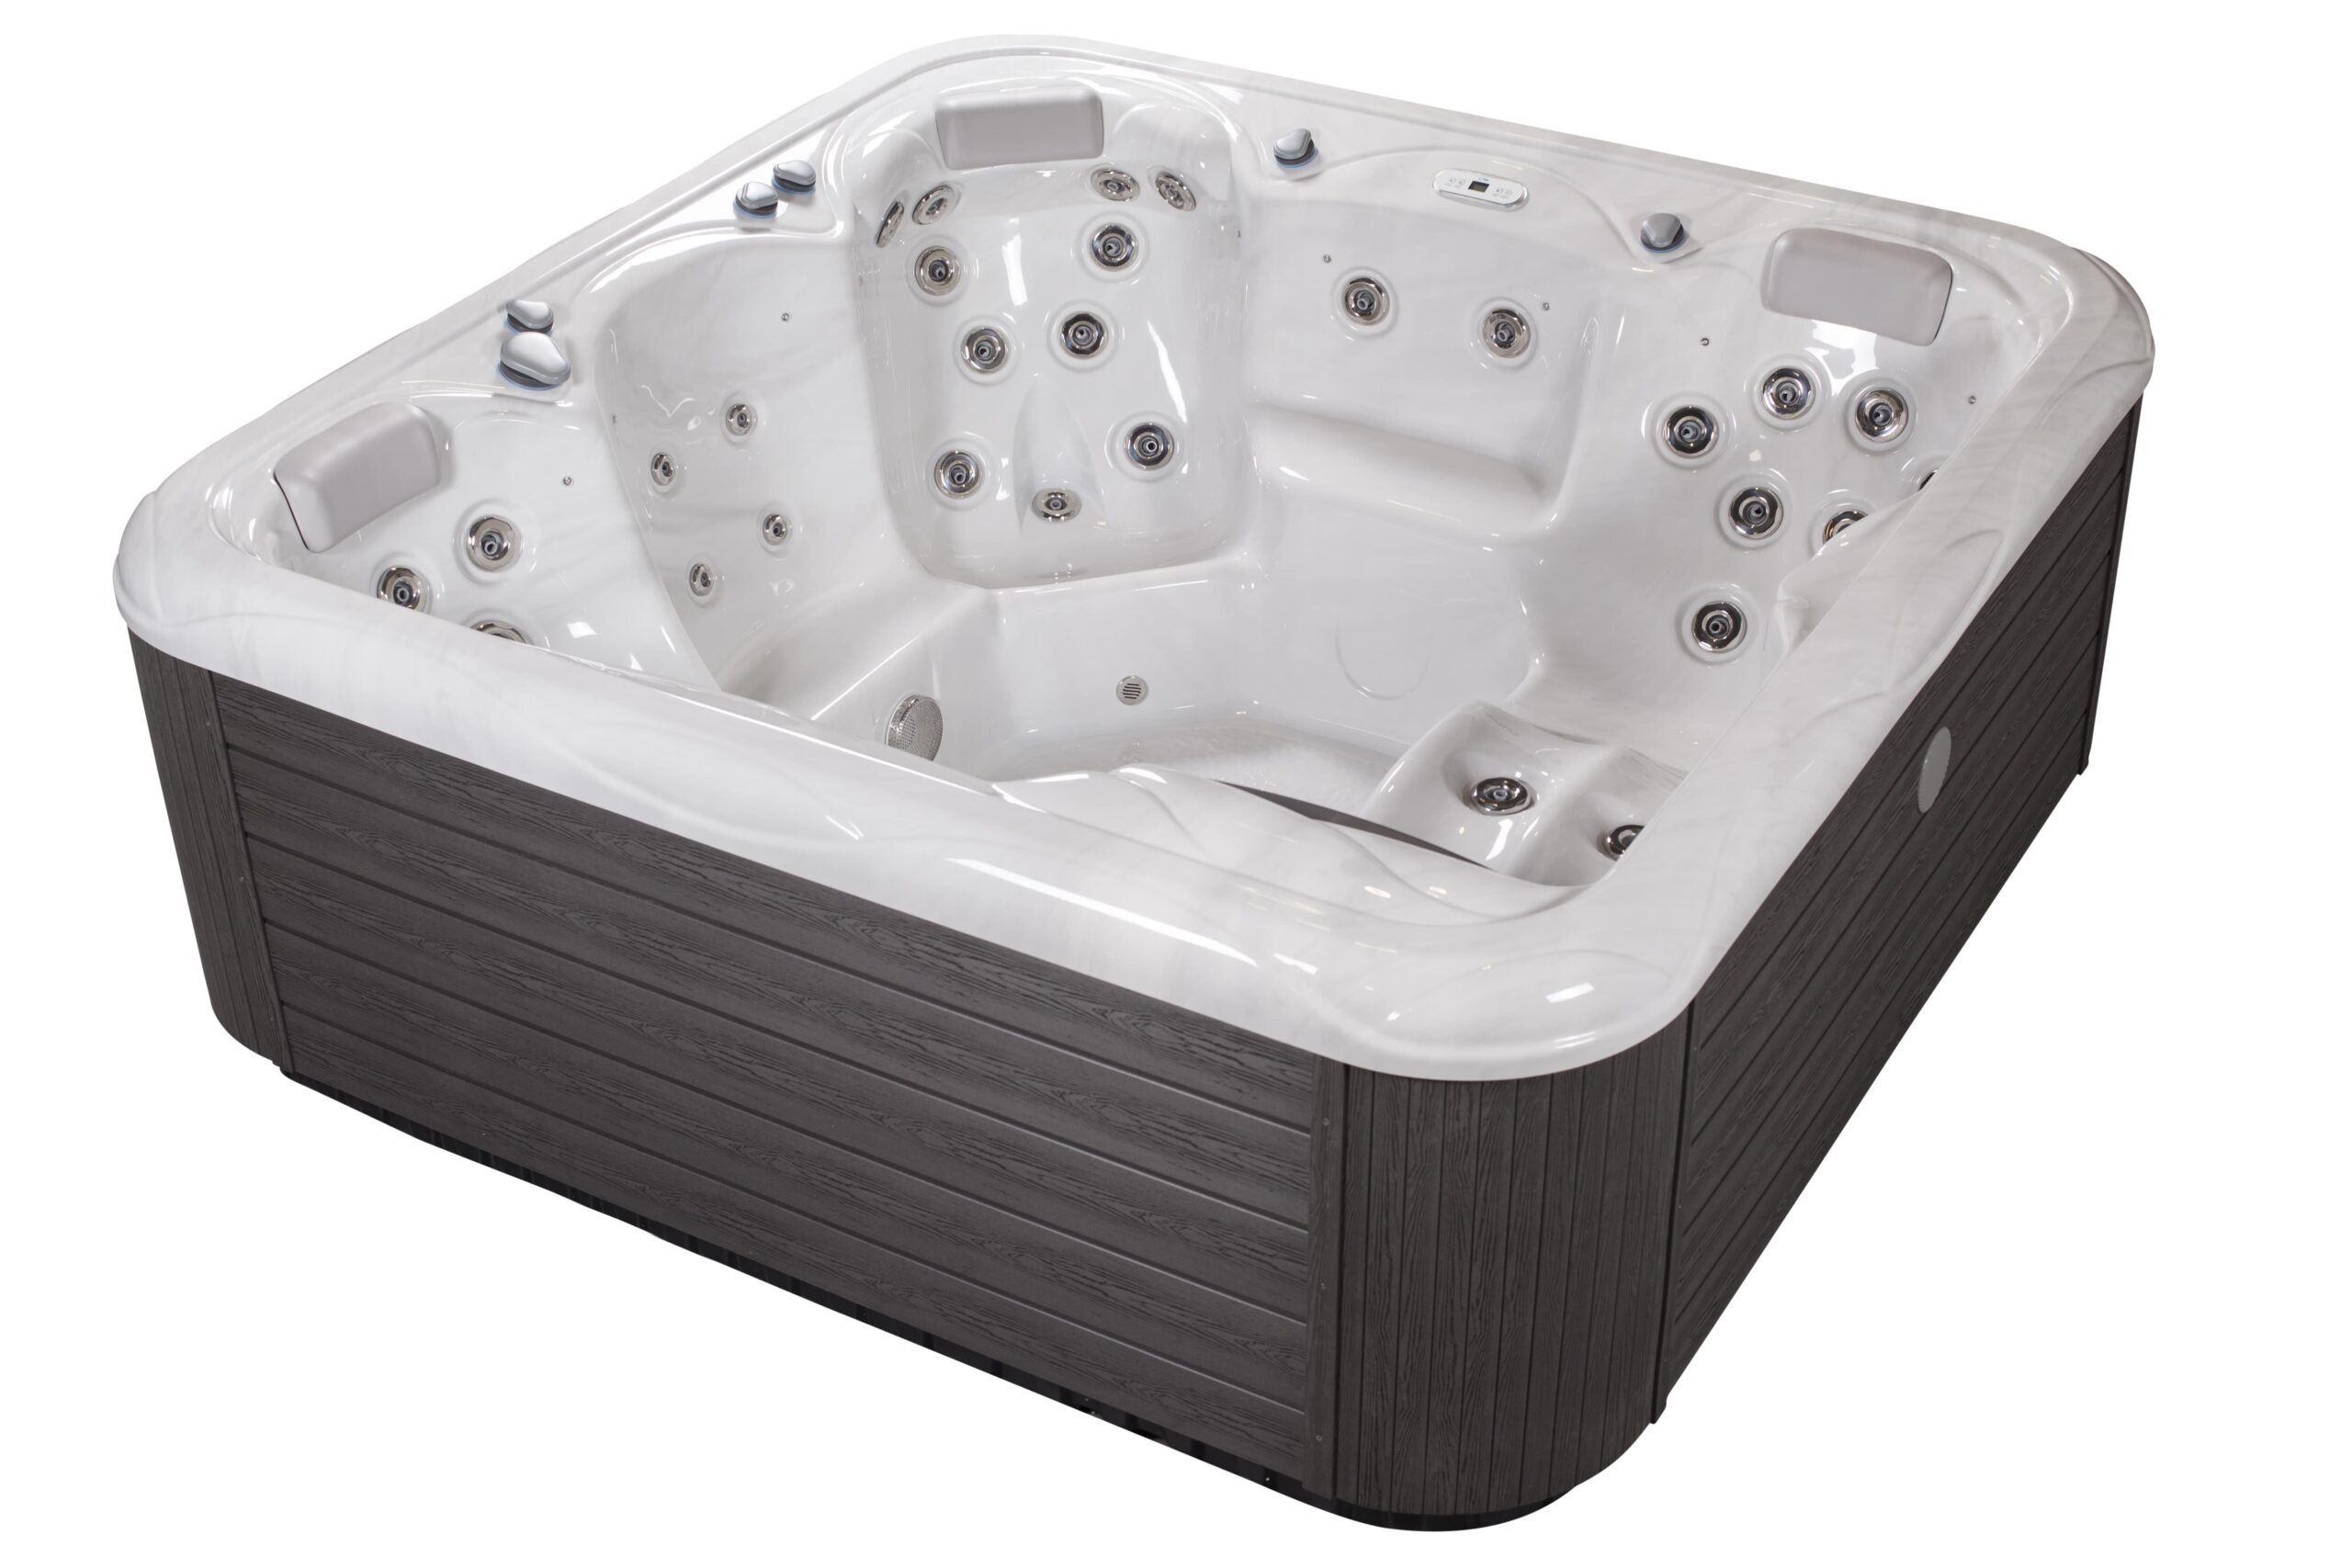 Large holiday home hot tub